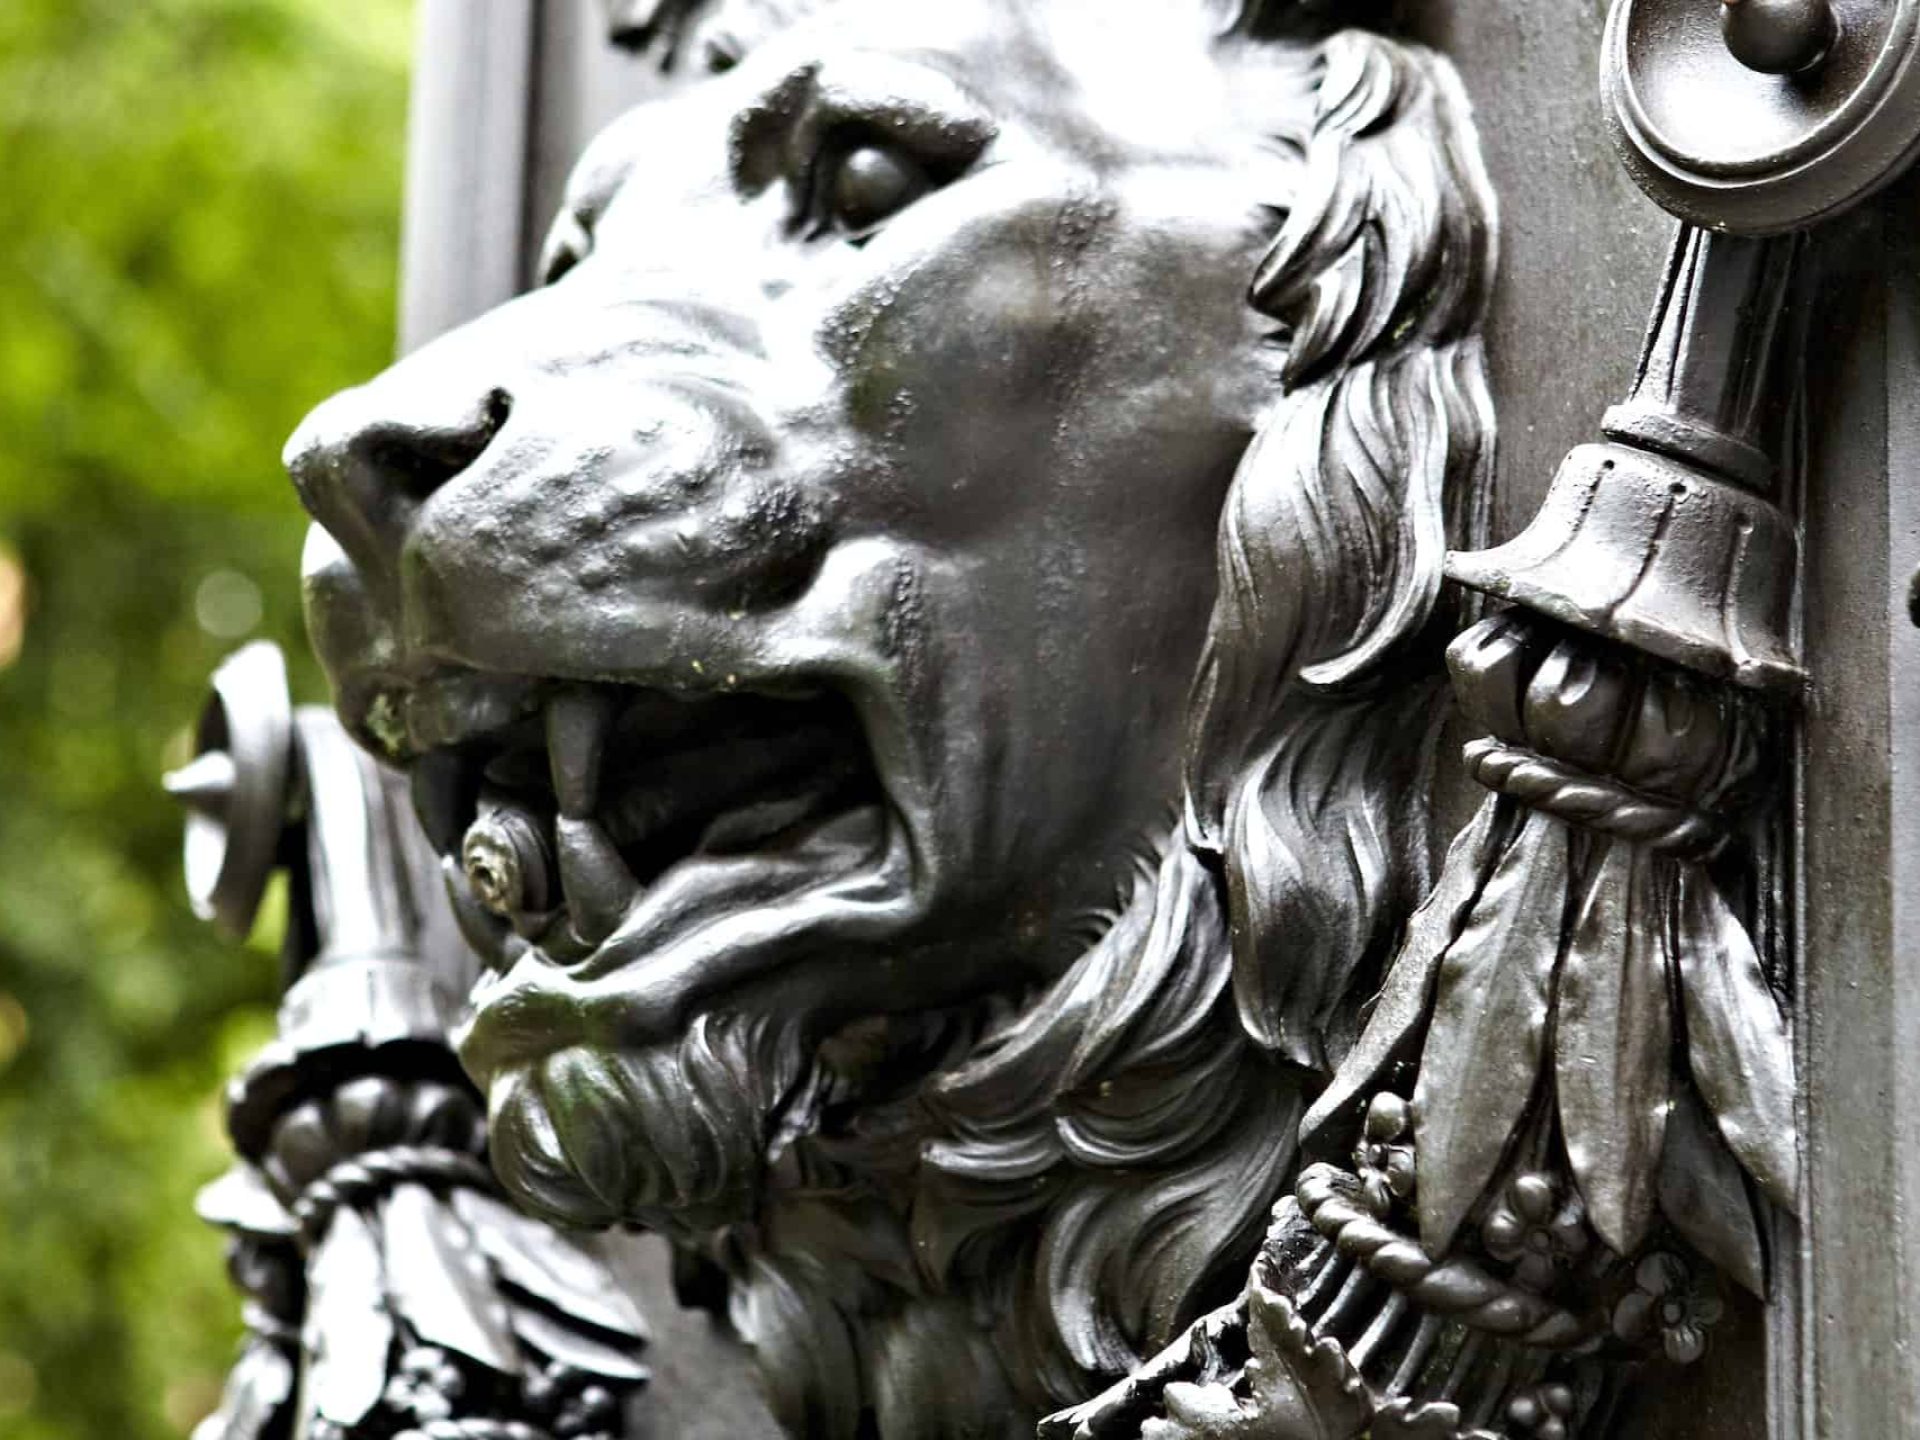 Close up of a metal casted lions head with a water spout in its mouth and casted metal tassels with leaves on either side.